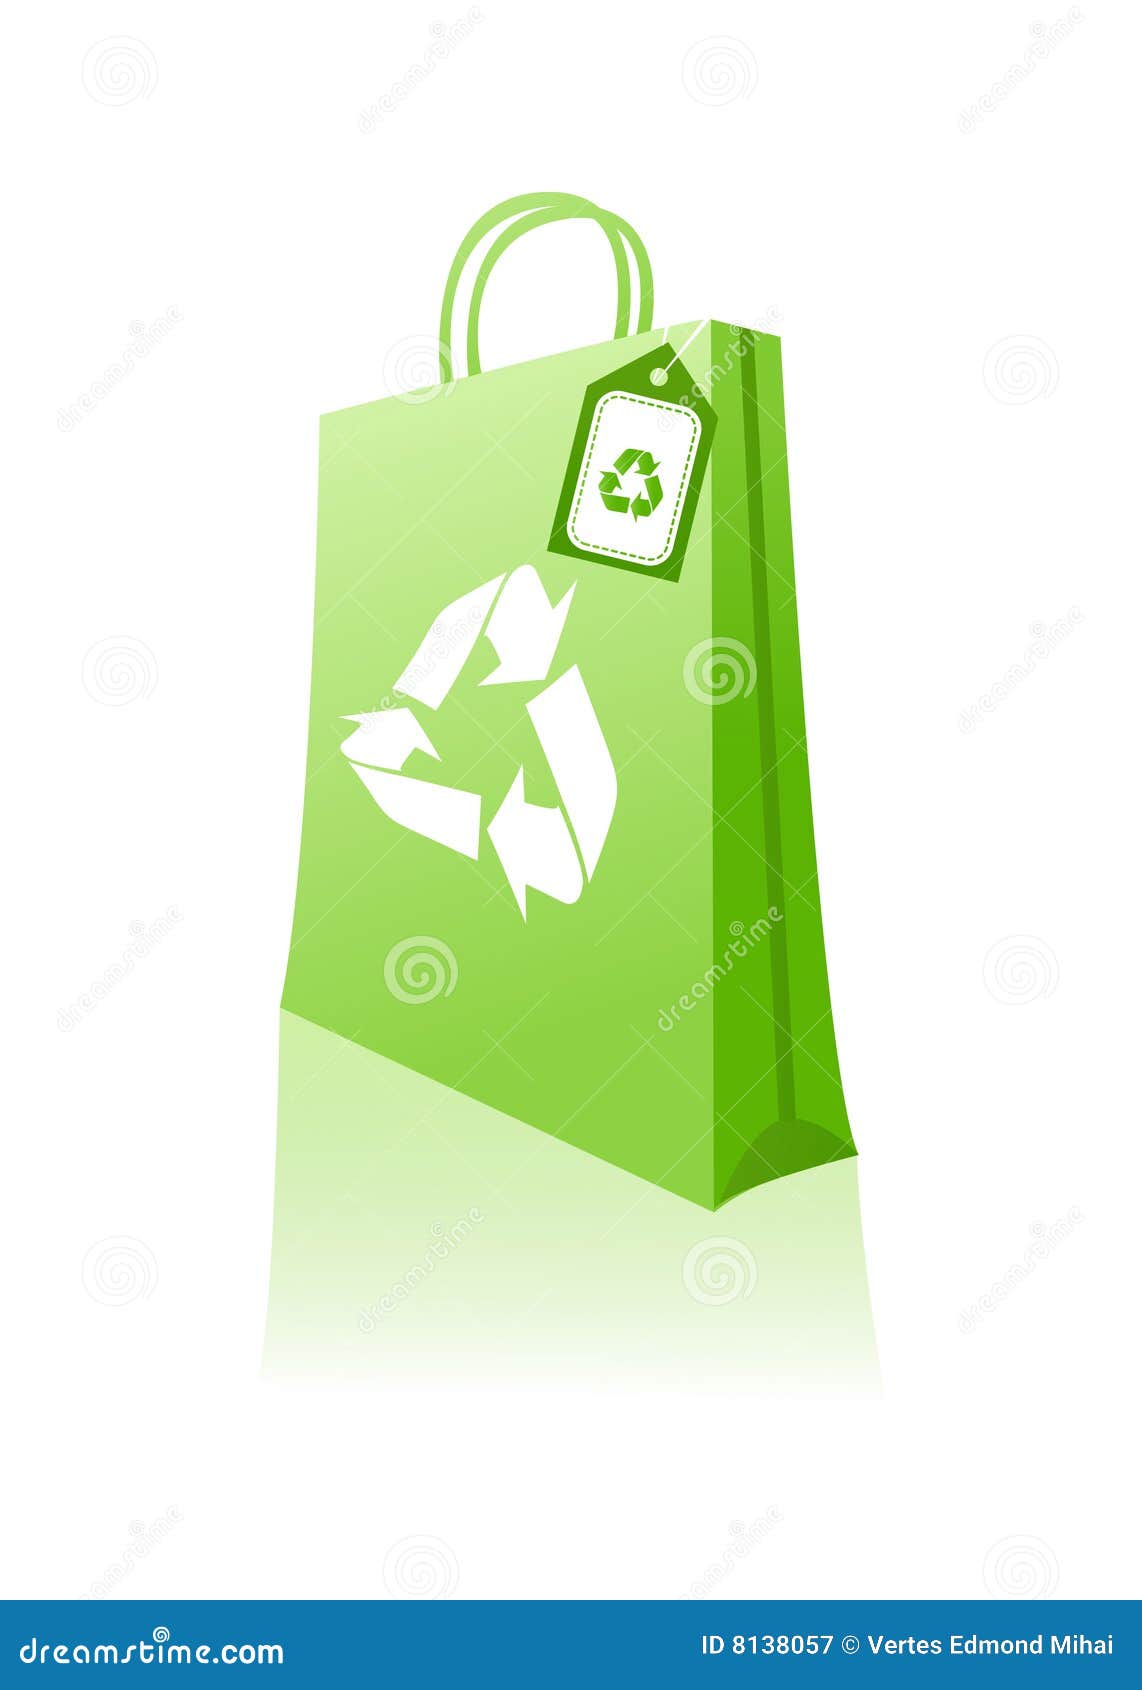 Green shopping bag stock vector. Illustration of wrapping - 8138057